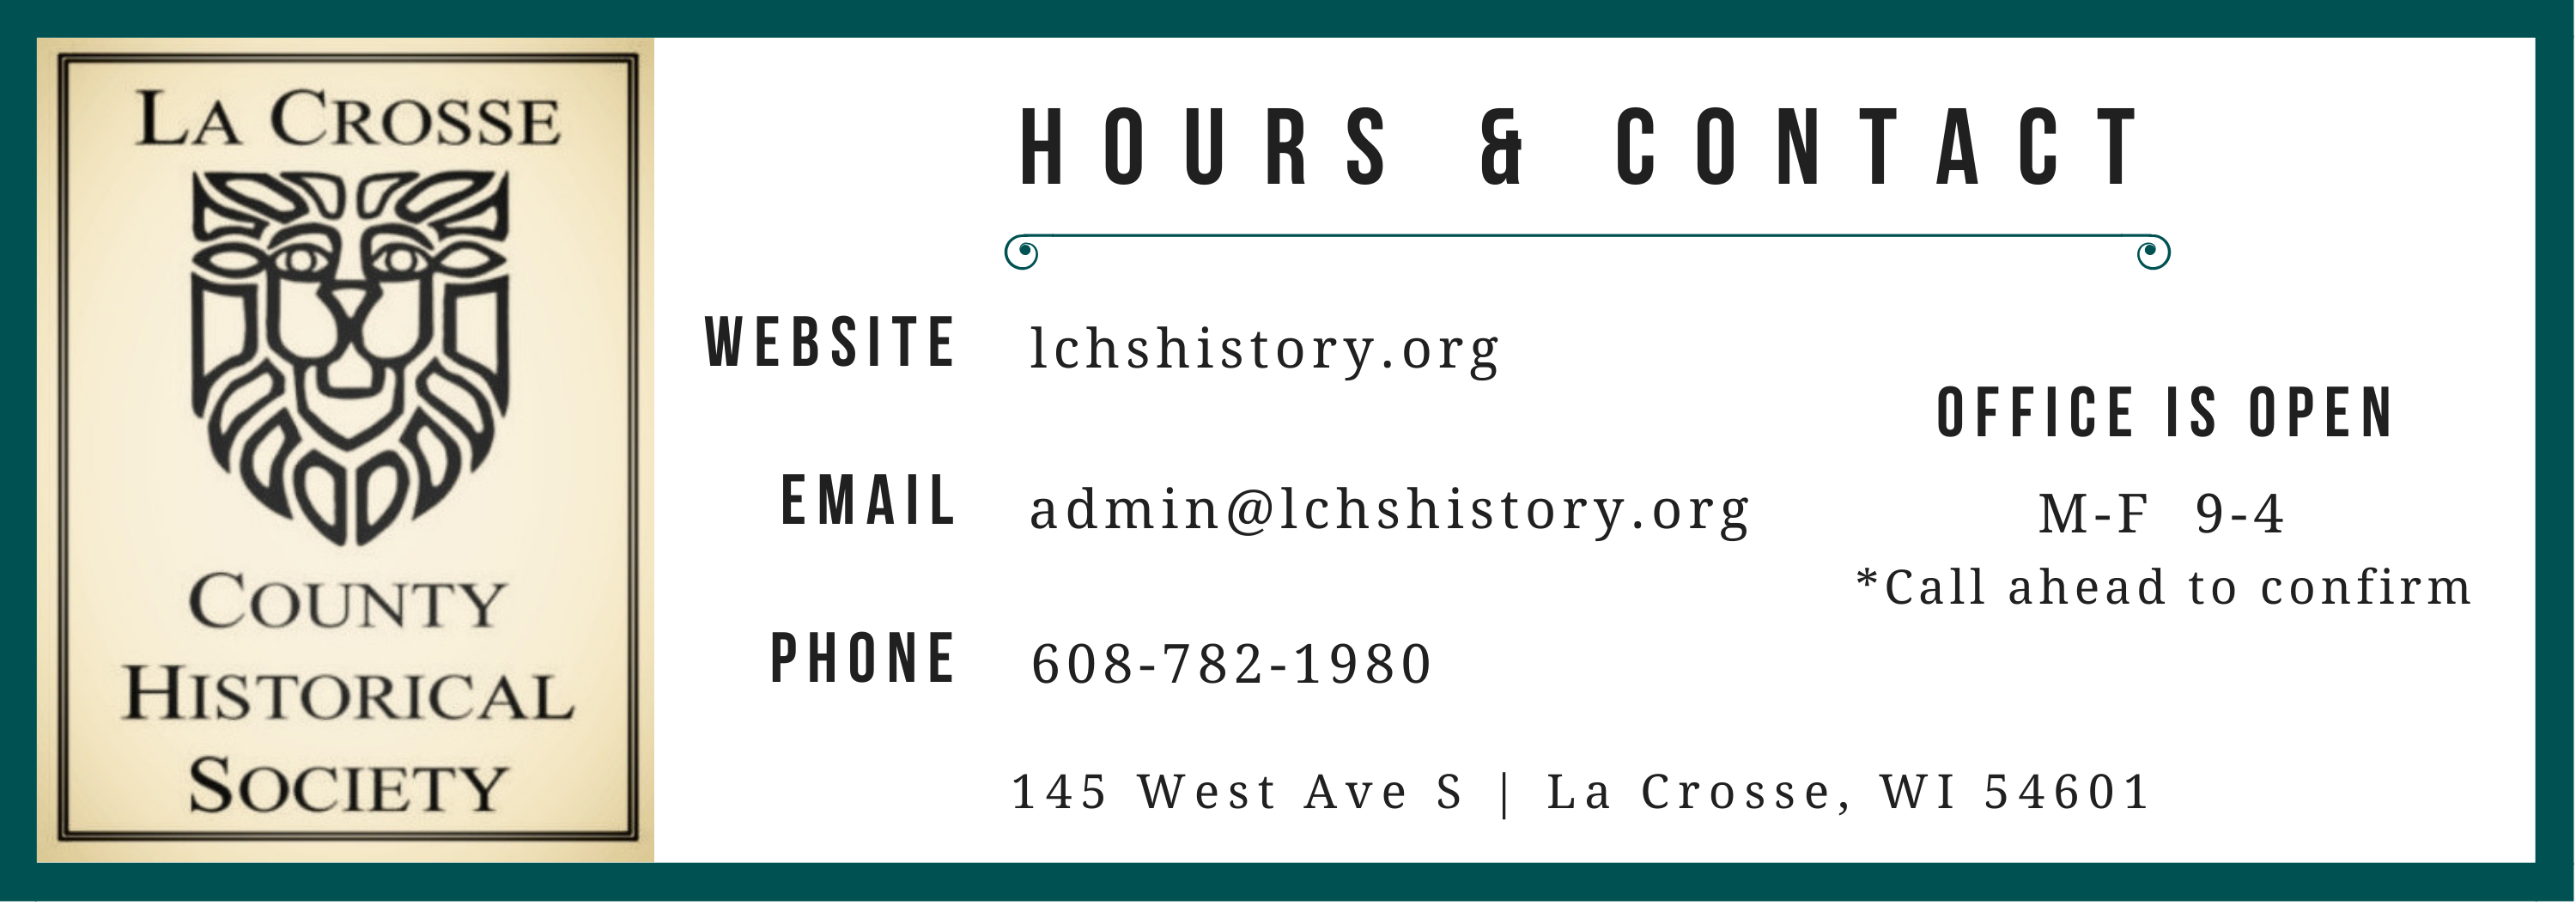 La Crosse County Historical Society logo and contact information